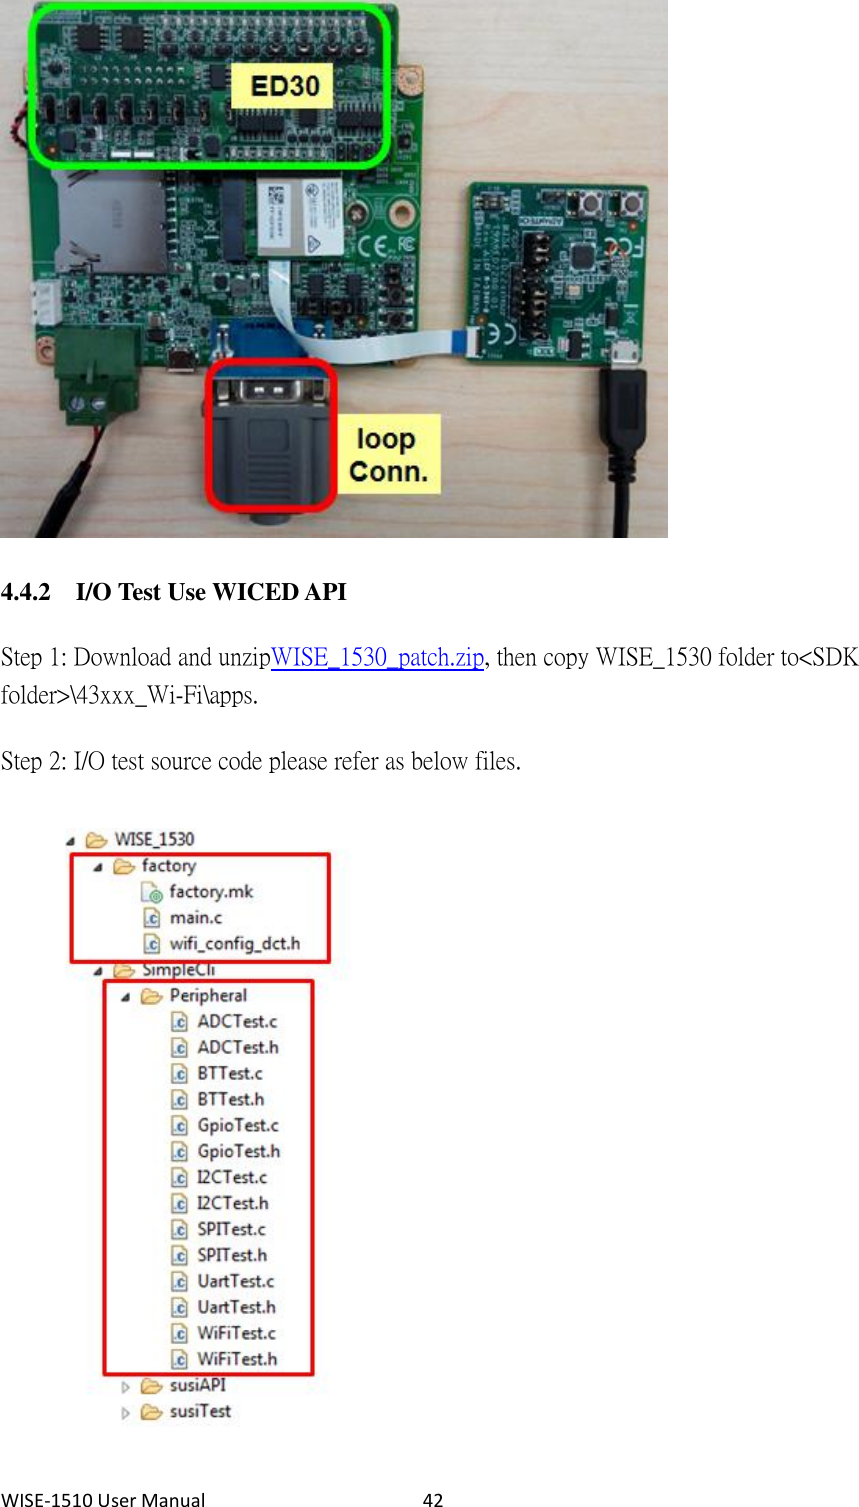 WISE-1510 User Manual  42  4.4.2 I/O Test Use WICED API Step 1: Download and unzip WISE_1530_patch.zip, then copy WISE_1530 folder to &lt;SDK folder&gt;\43xxx_Wi-Fi\apps.   Step 2: I/O test source code please refer as below files.    